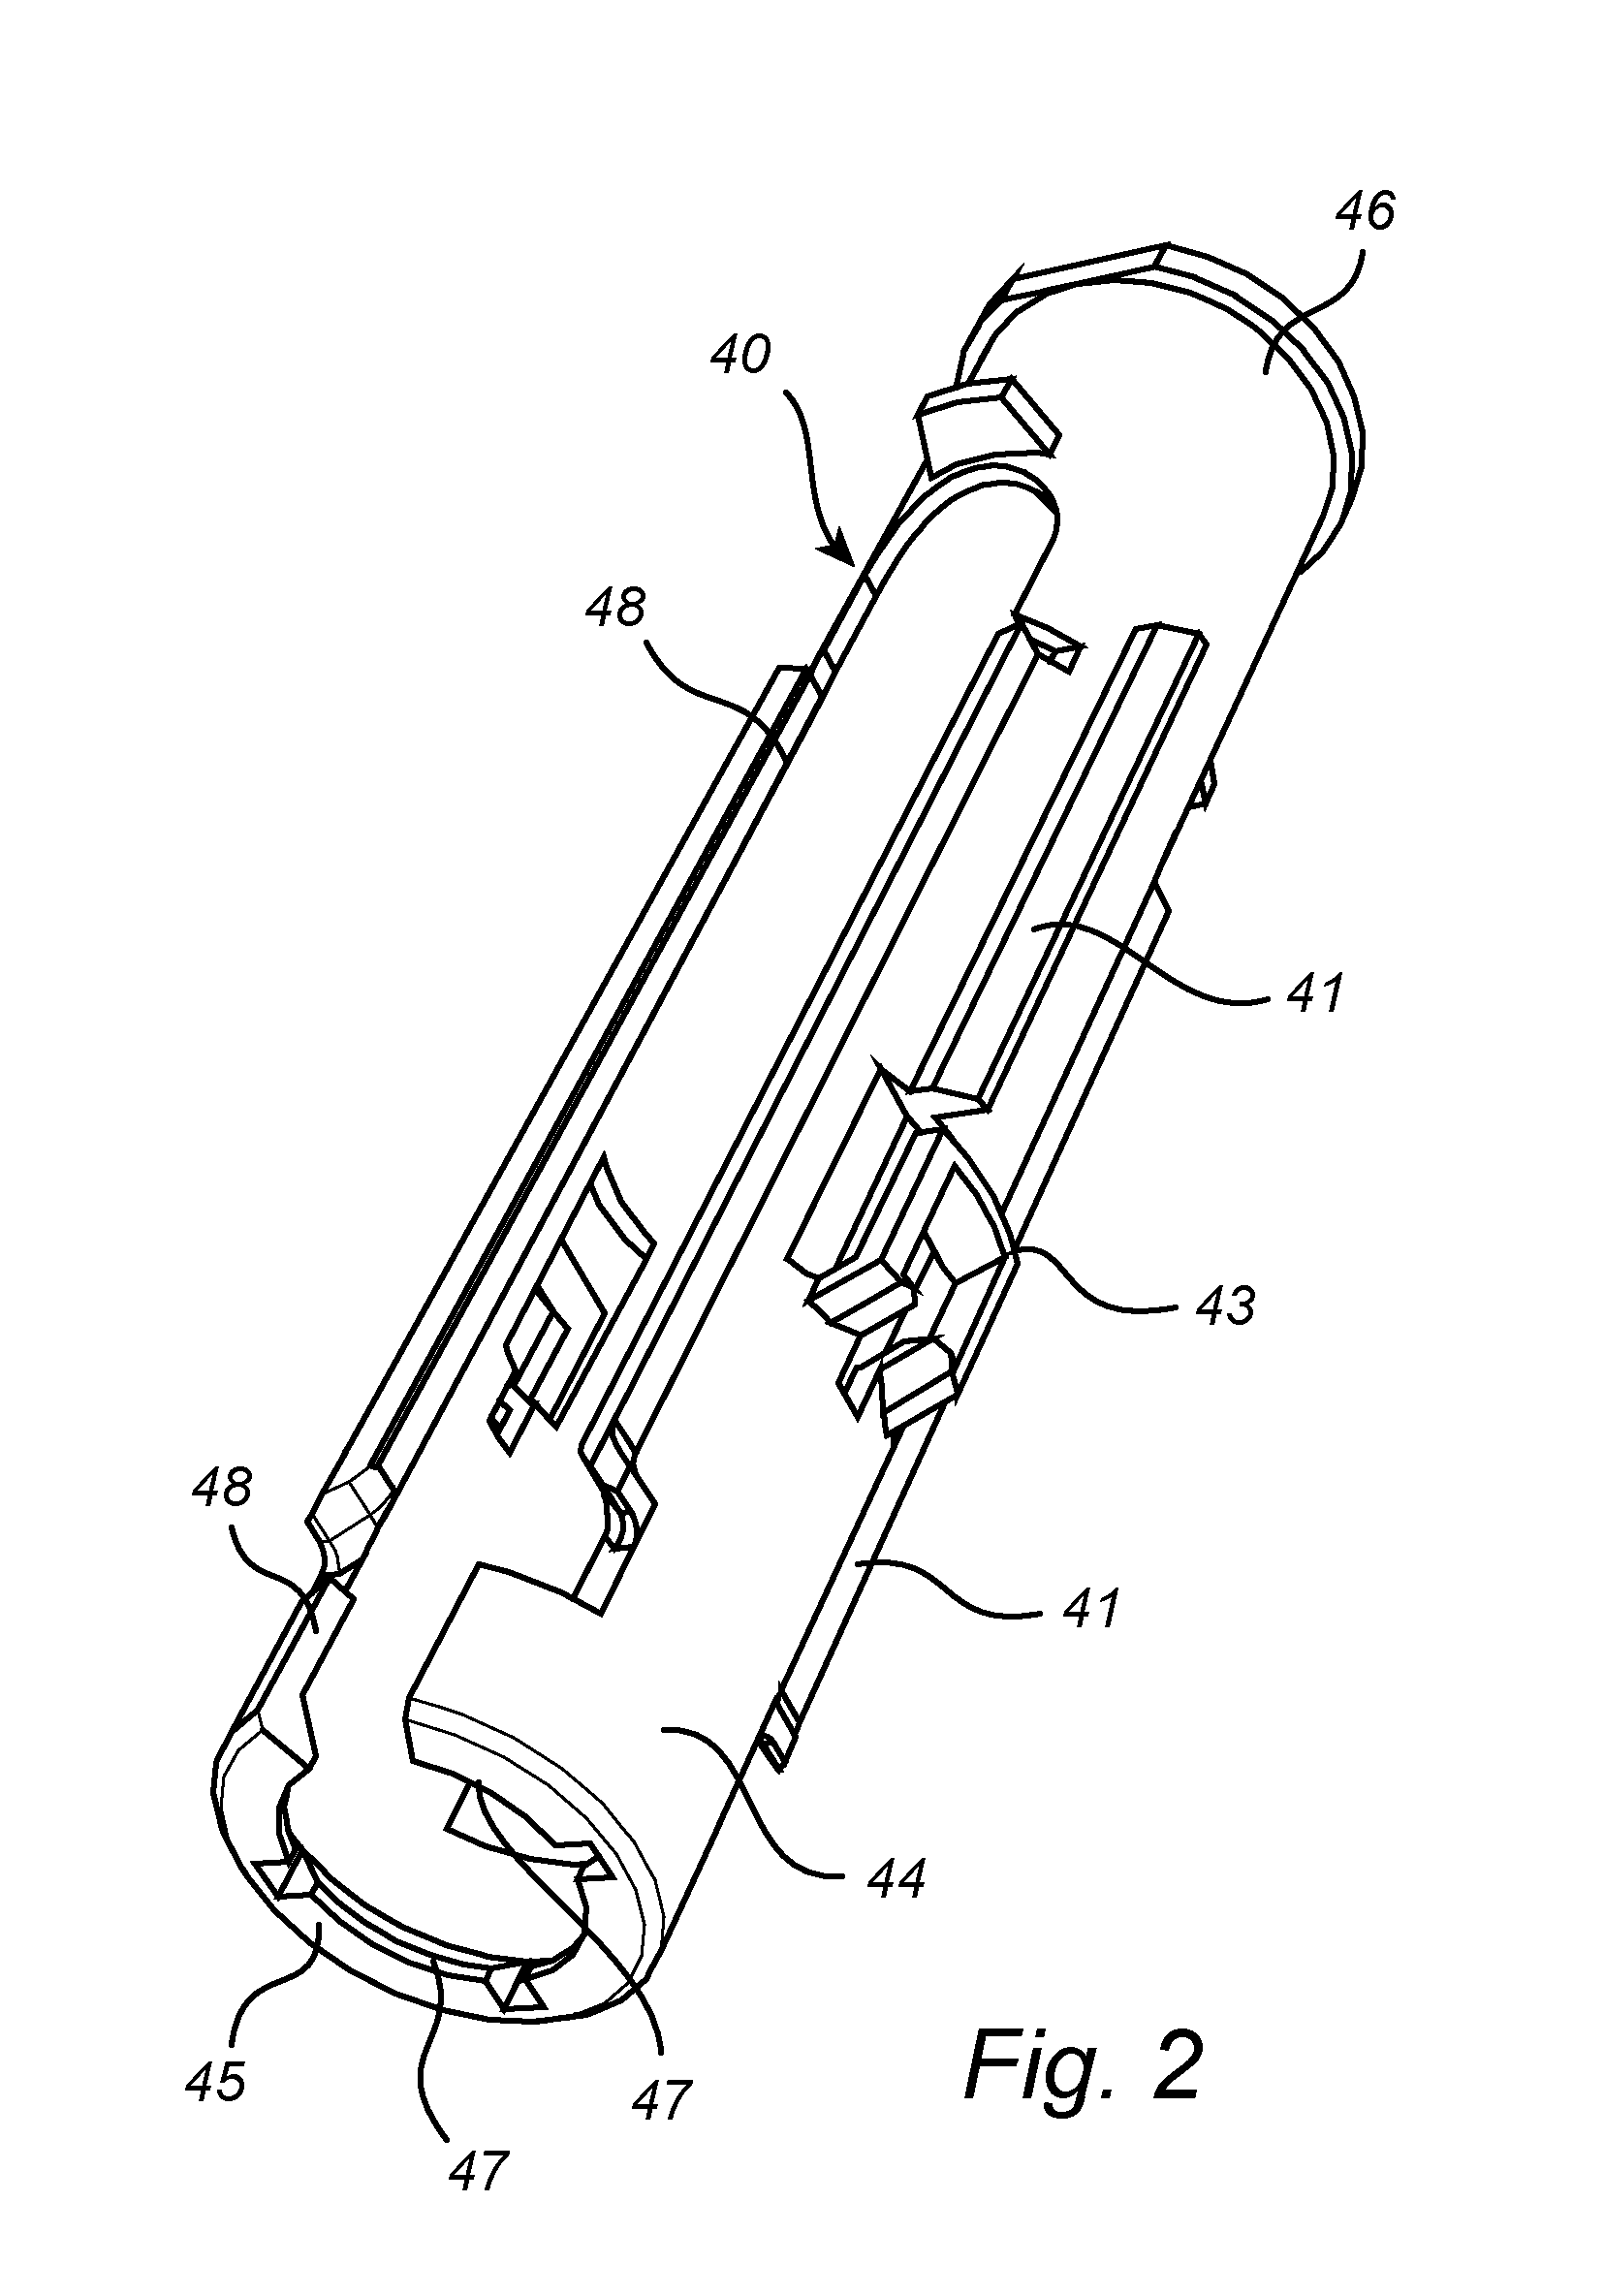 Auto-Injection Device